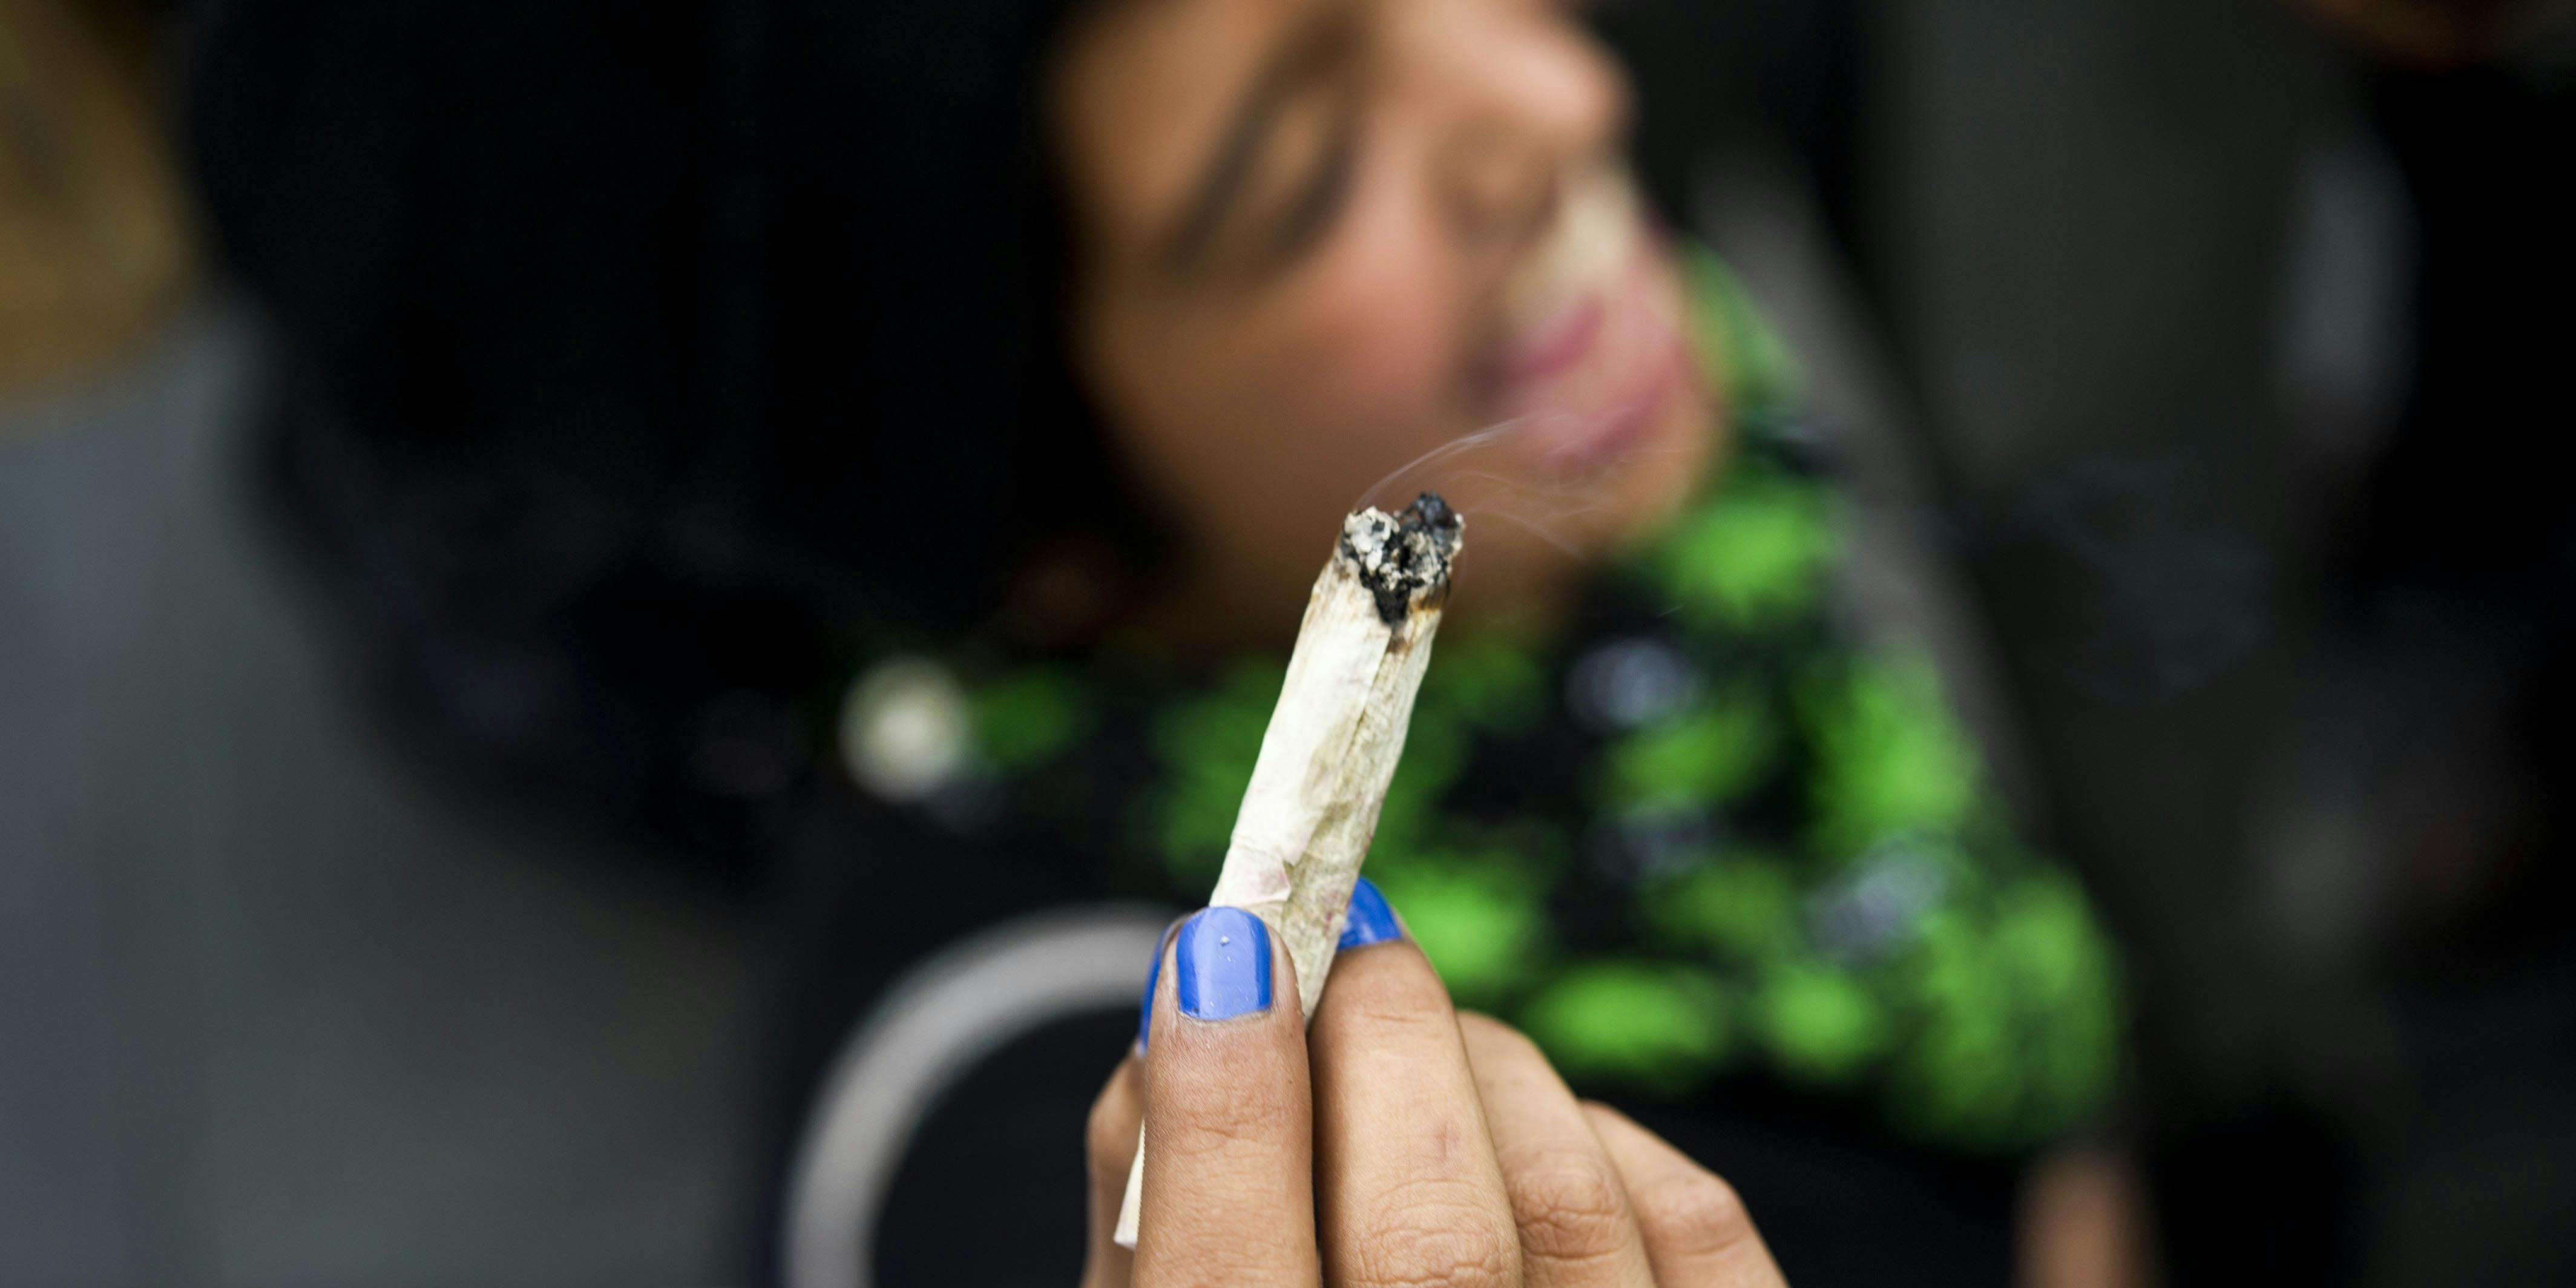 Two physicians in New Jersey want to open what they're calling the disneyland of marijuana. Here, a woman is shown smoking a joint and smiling